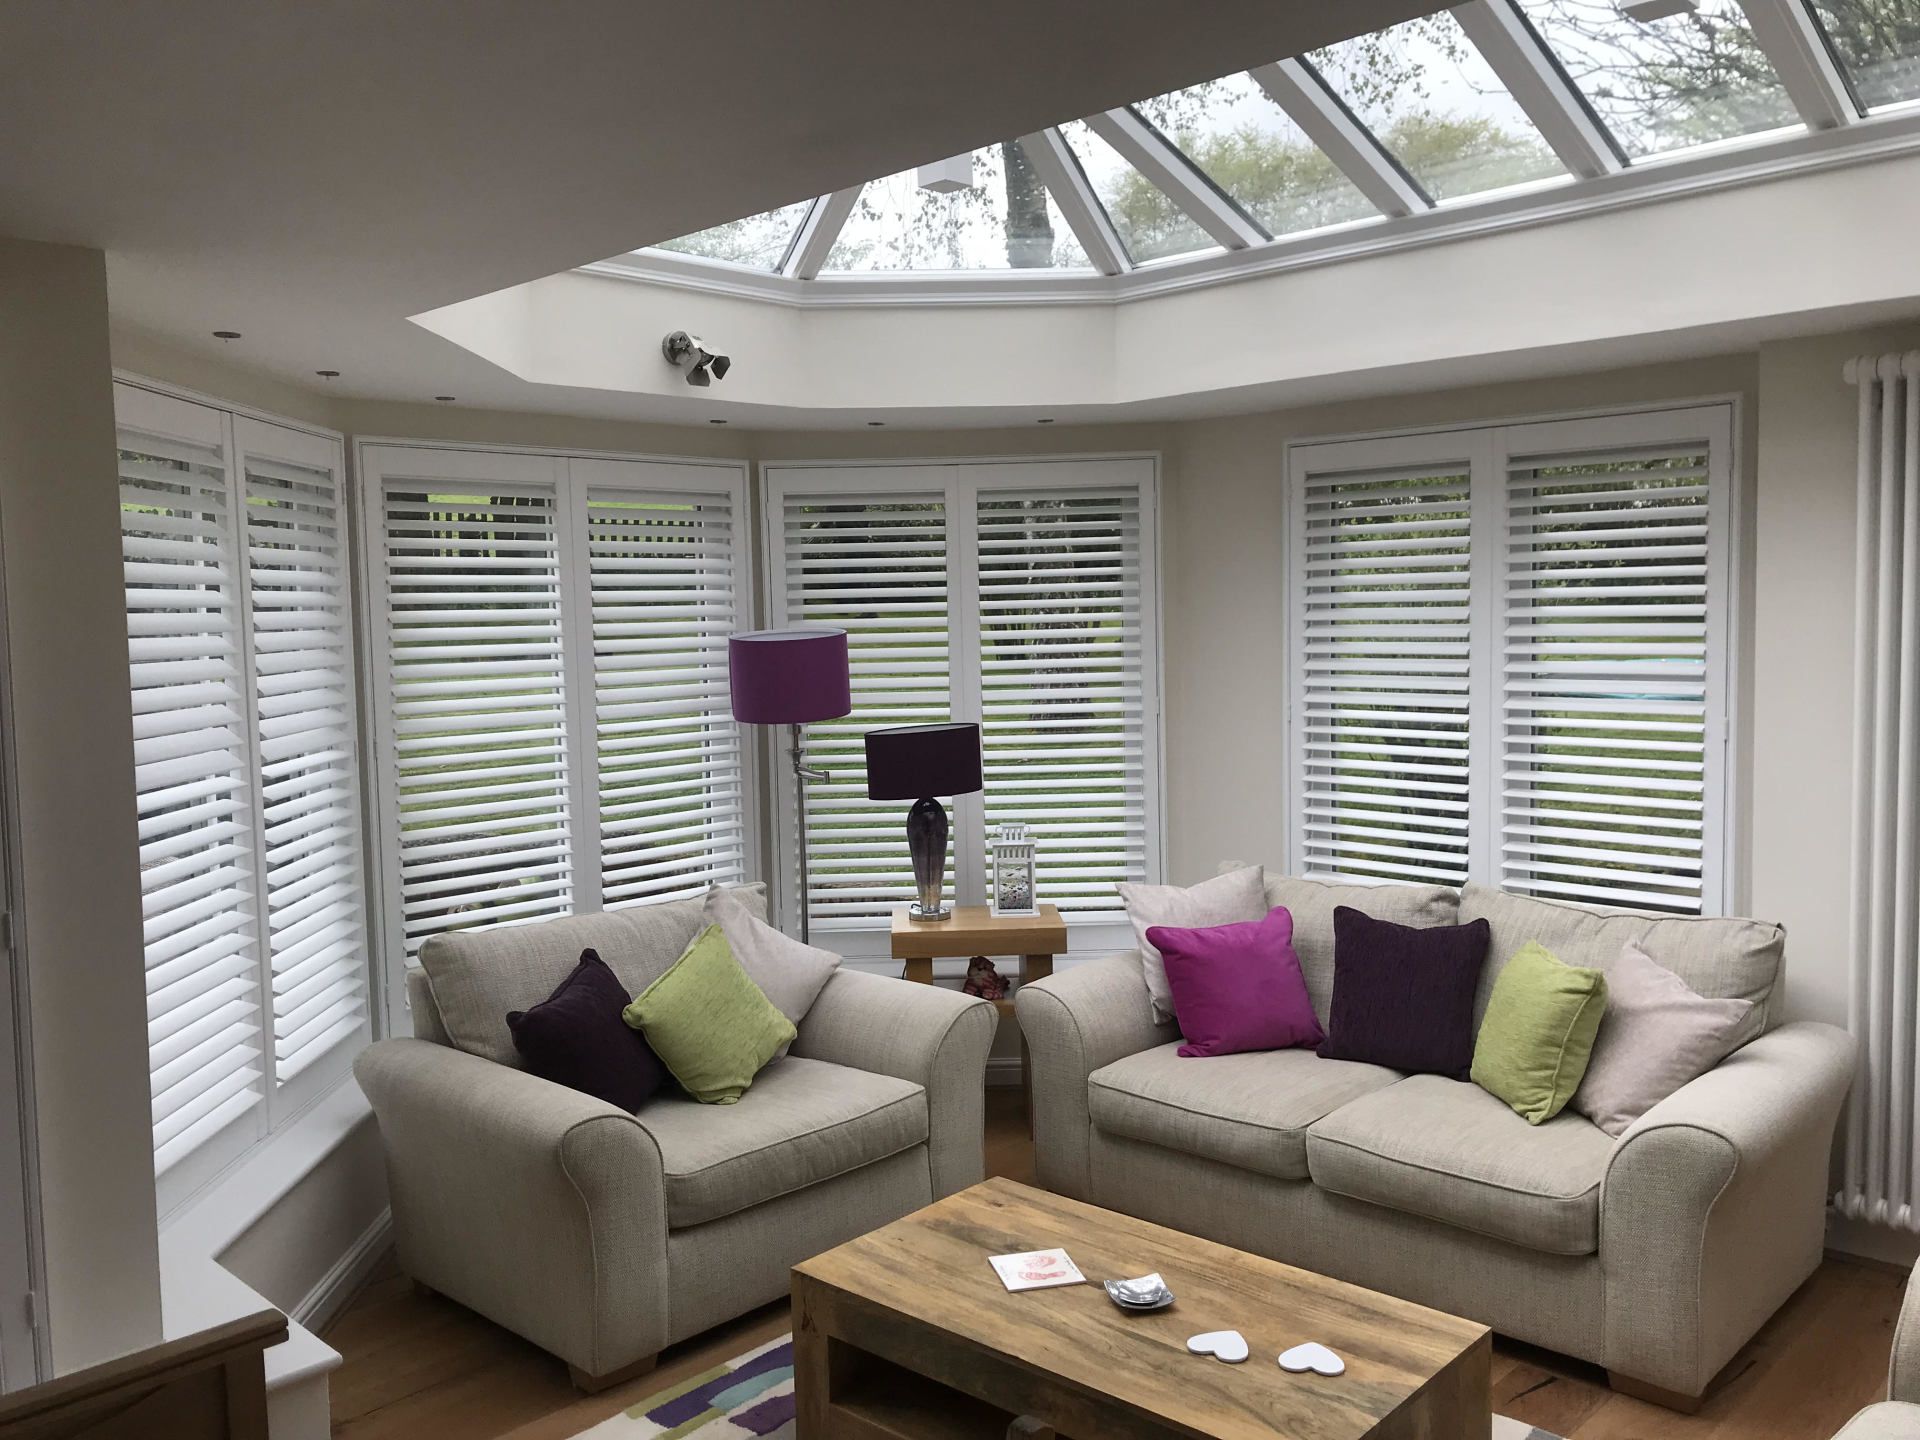 British Made Shutters available to purchase in Tongham | Wooden Shutters | Patio Door Shutters |  Made-to-Measure Shutters